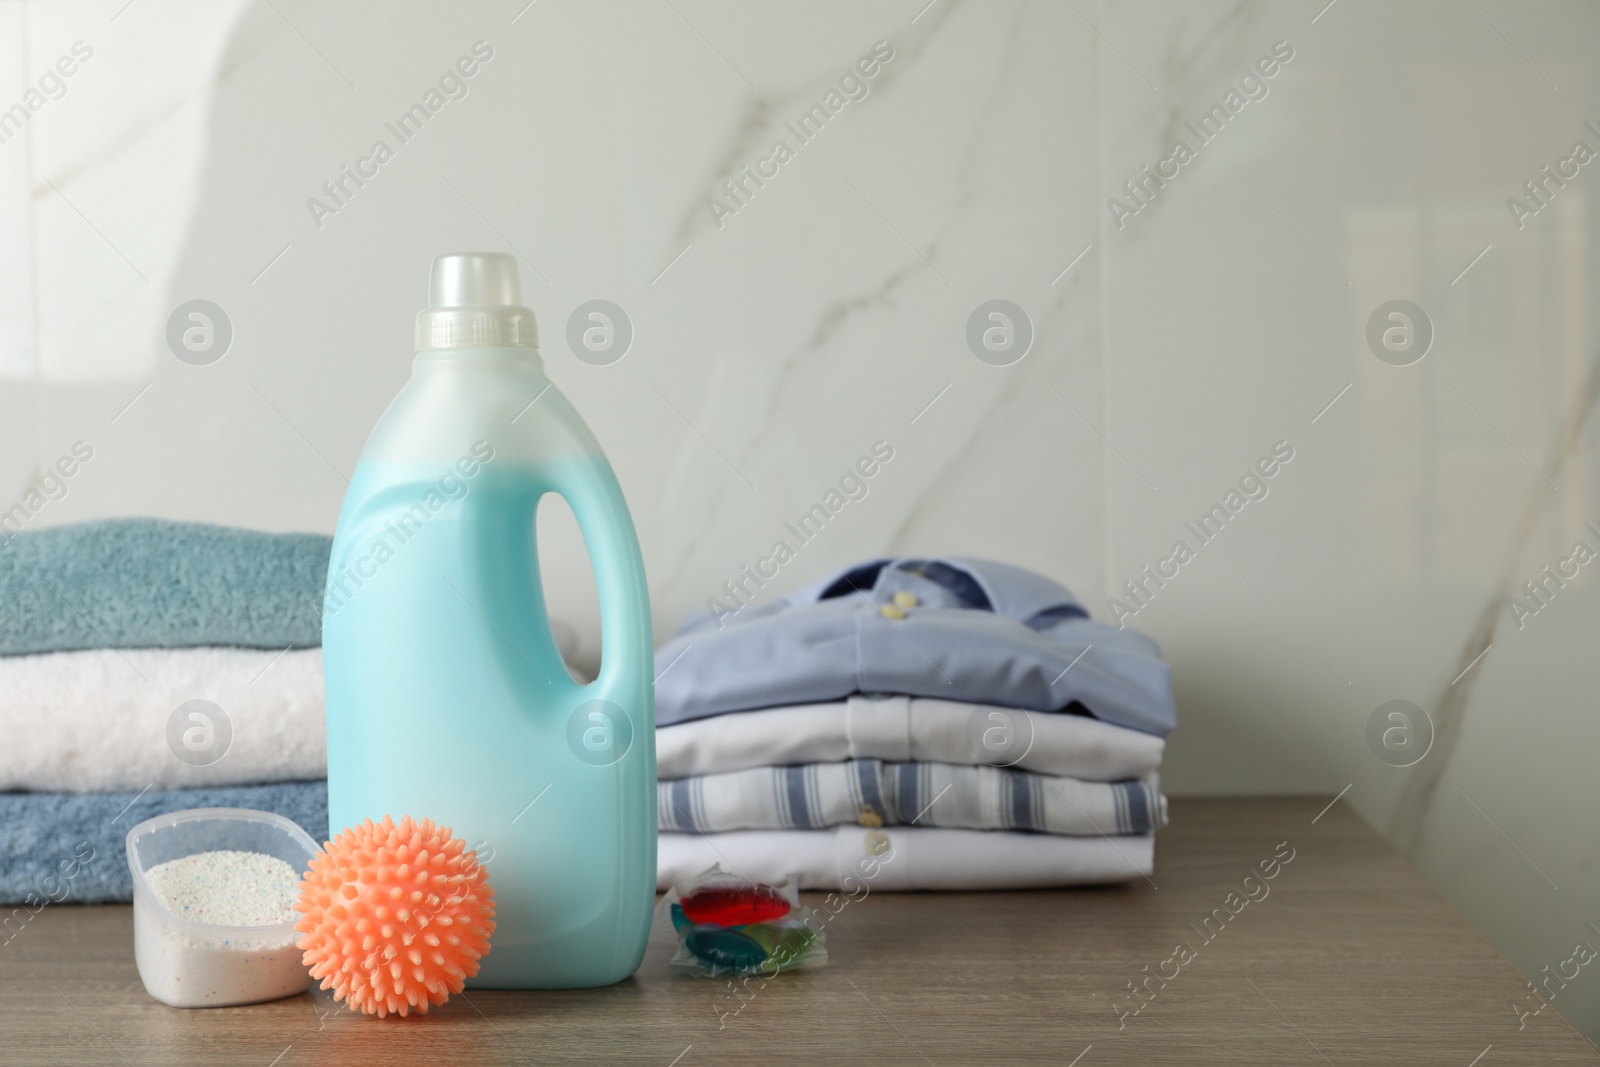 Photo of Orange dryer ball, detergents, clean towels and clothes on wooden table. Space for text